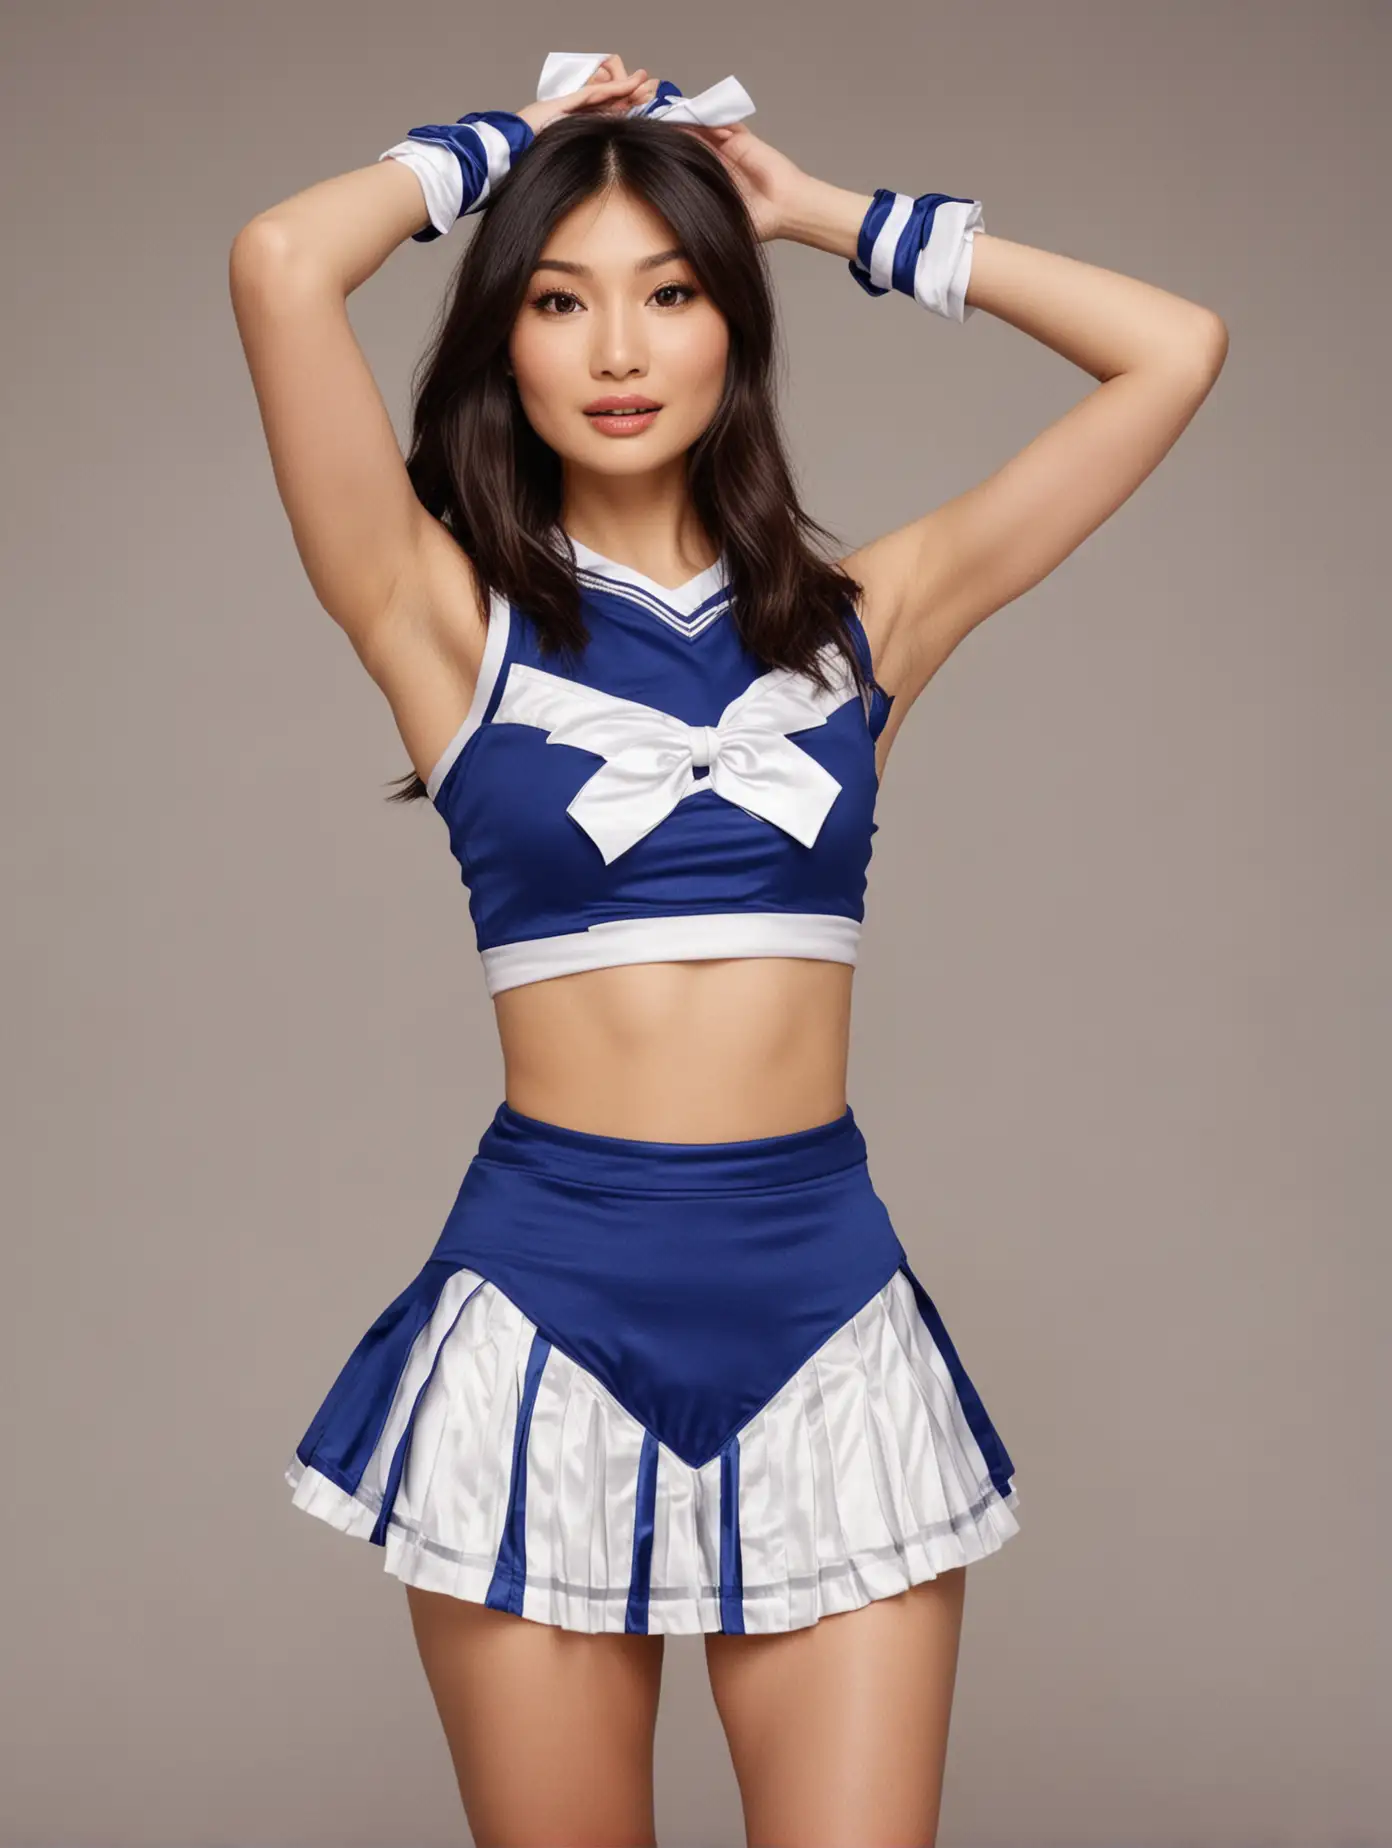 beautiful Gemma Chan in a short blue and white cheerleader outfit with her skirt held up showing satin panties